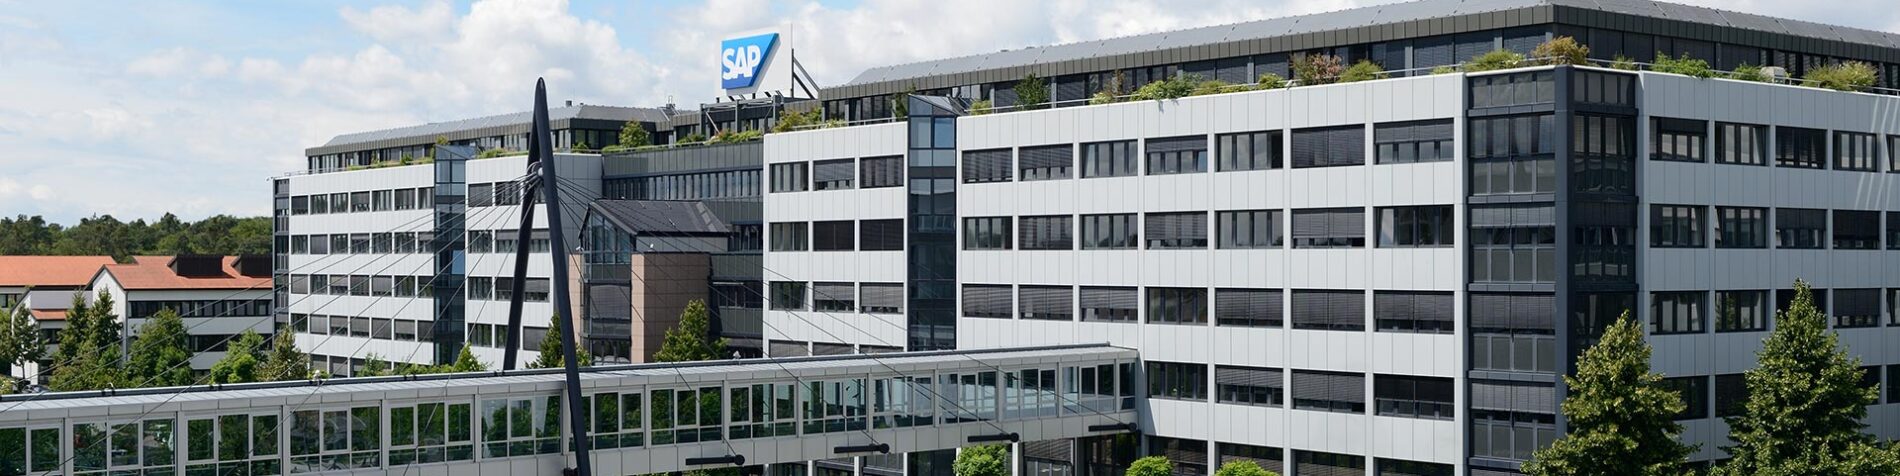 SAP to Release Fourth Quarter and Year-End 2020 Results